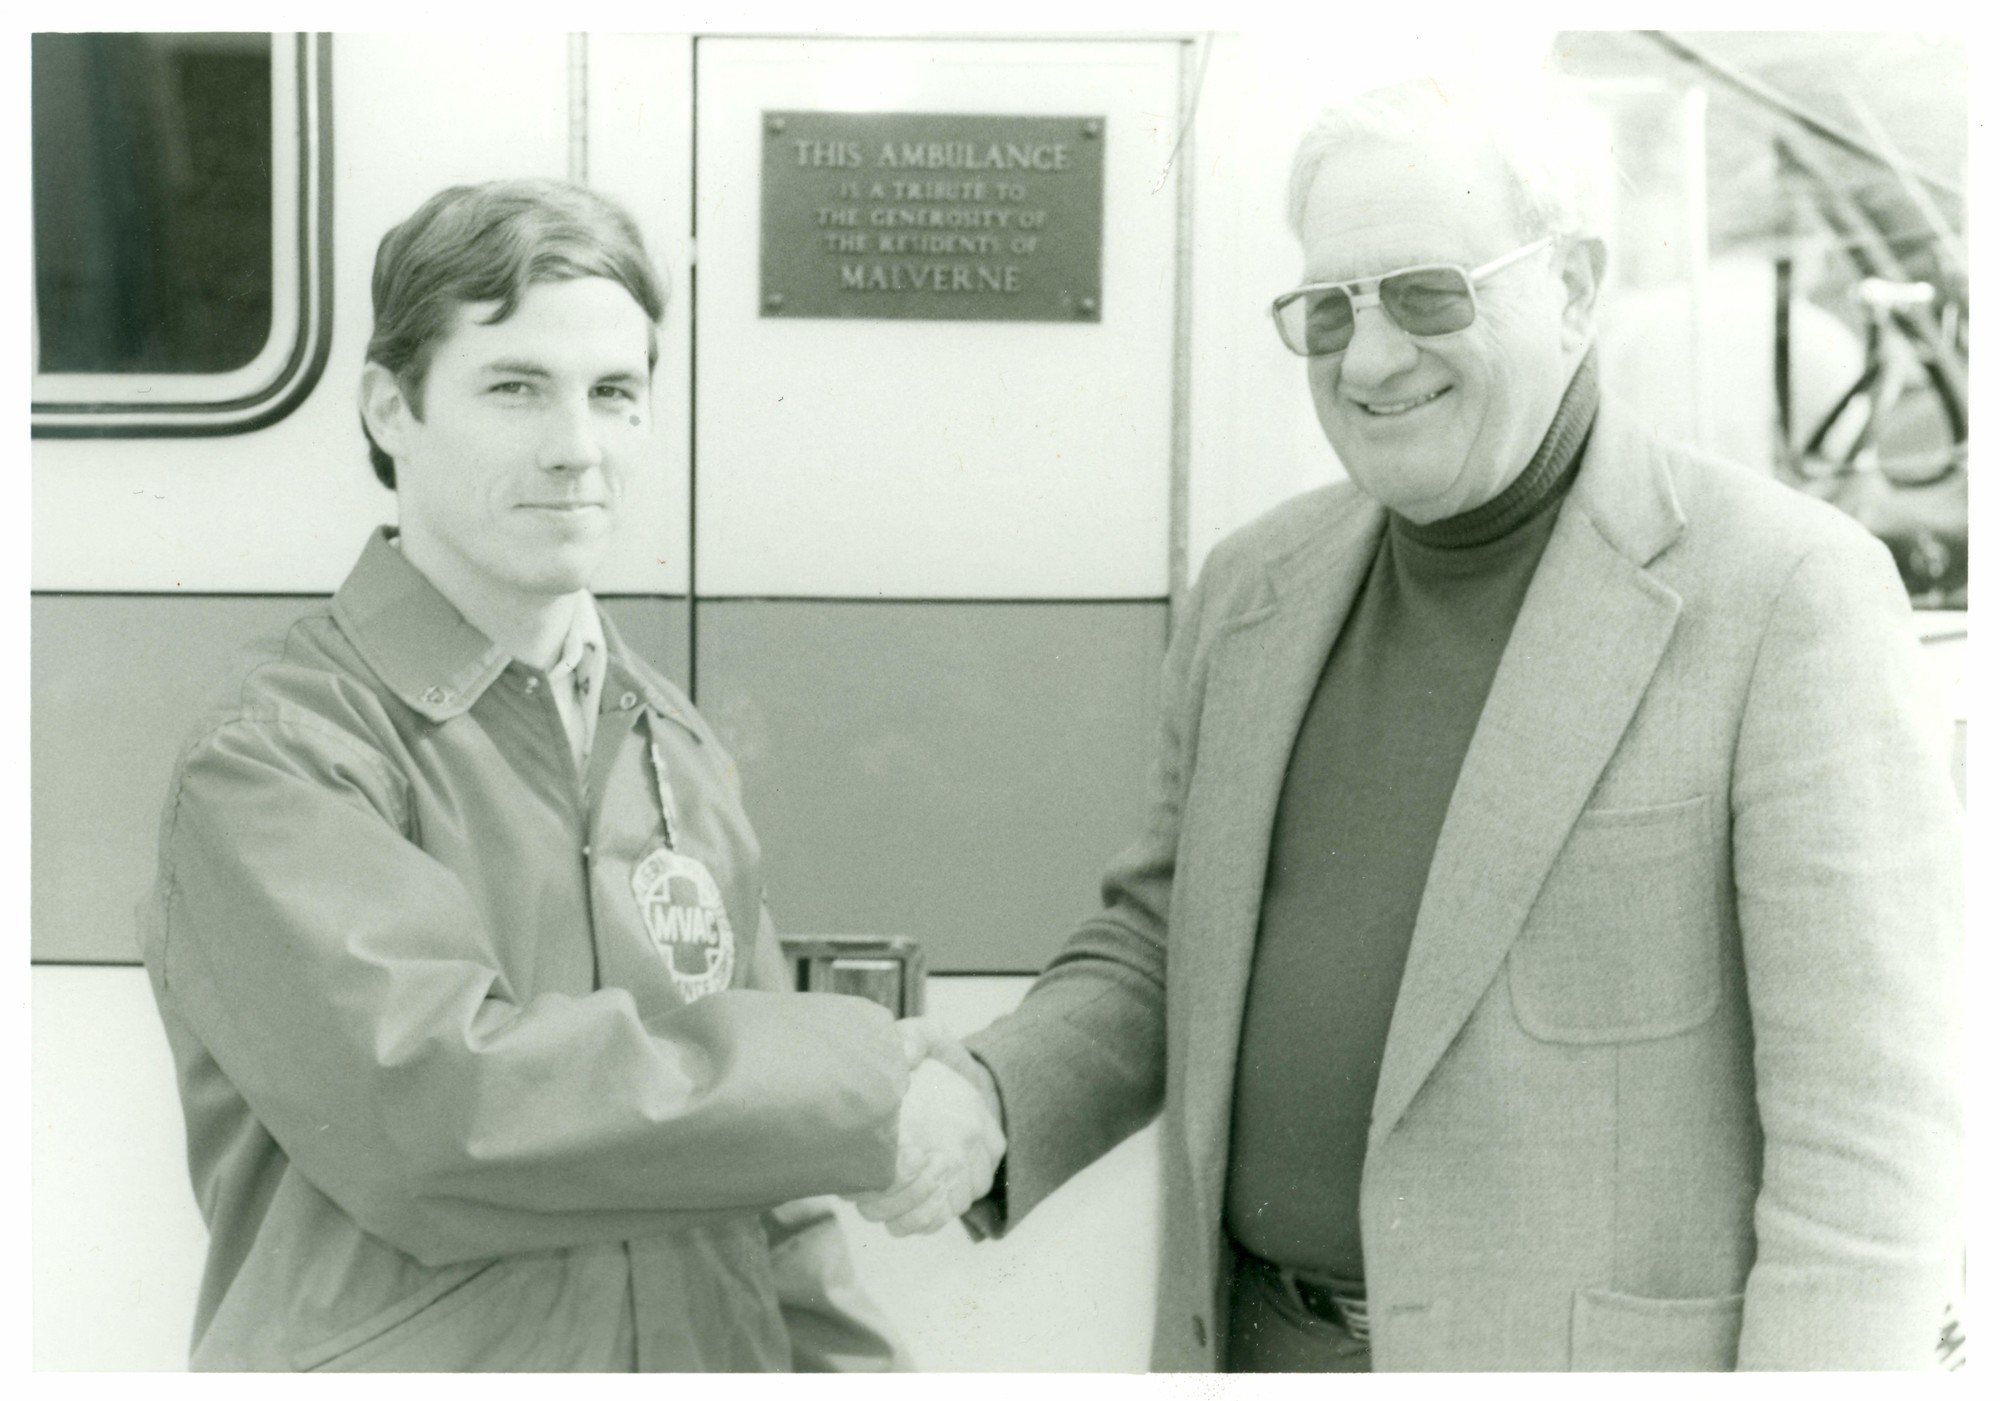 A young Bill Malone with Malverne Mayor Stewart Morrow during the dedication of a new ambulance in 1983.